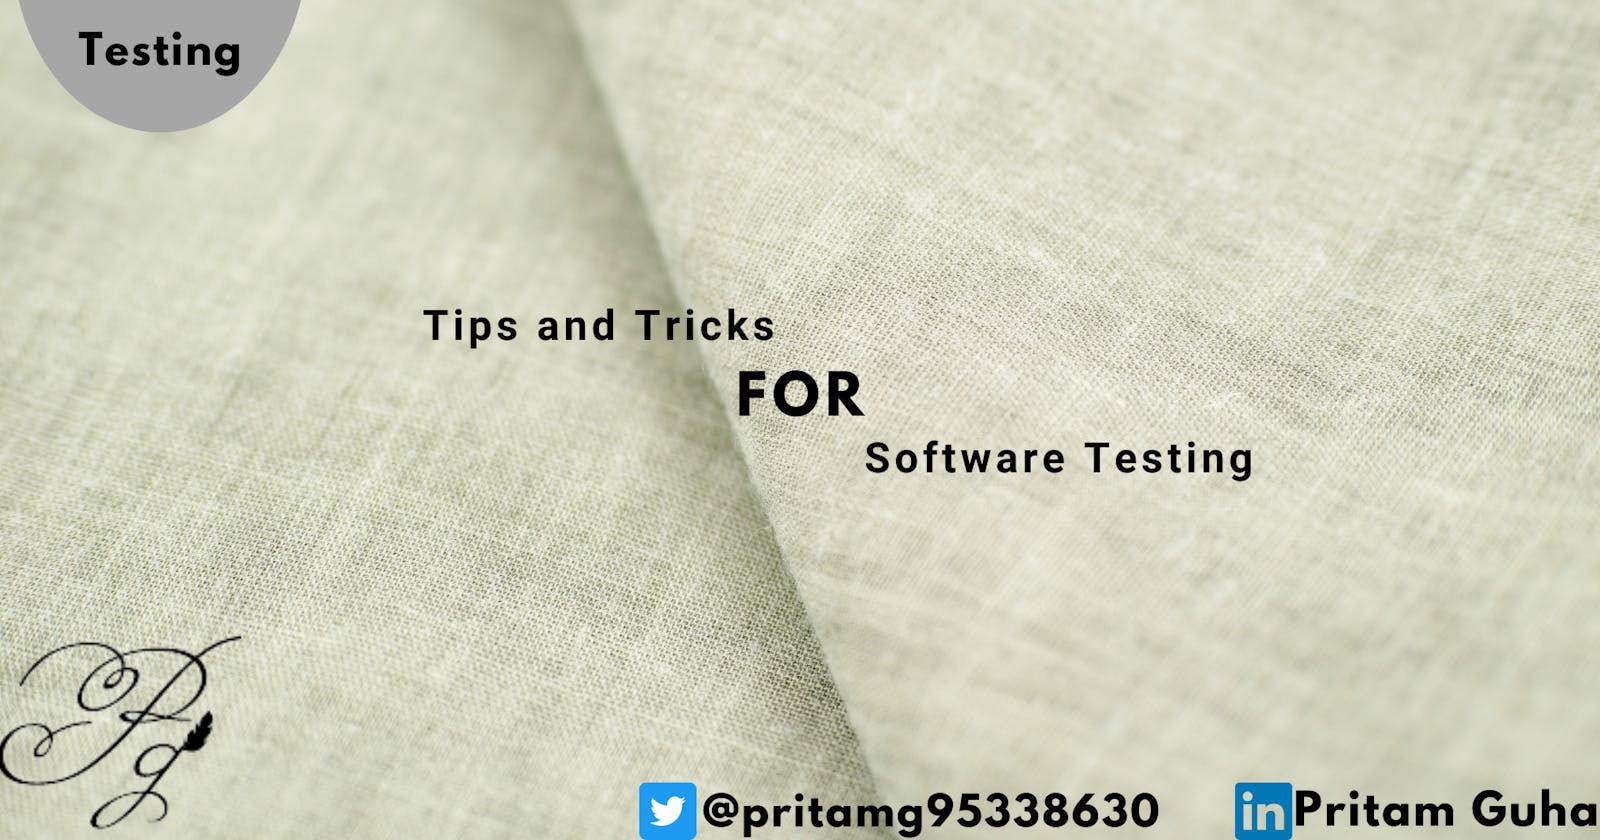 Tips and Tricks for Software Testing.